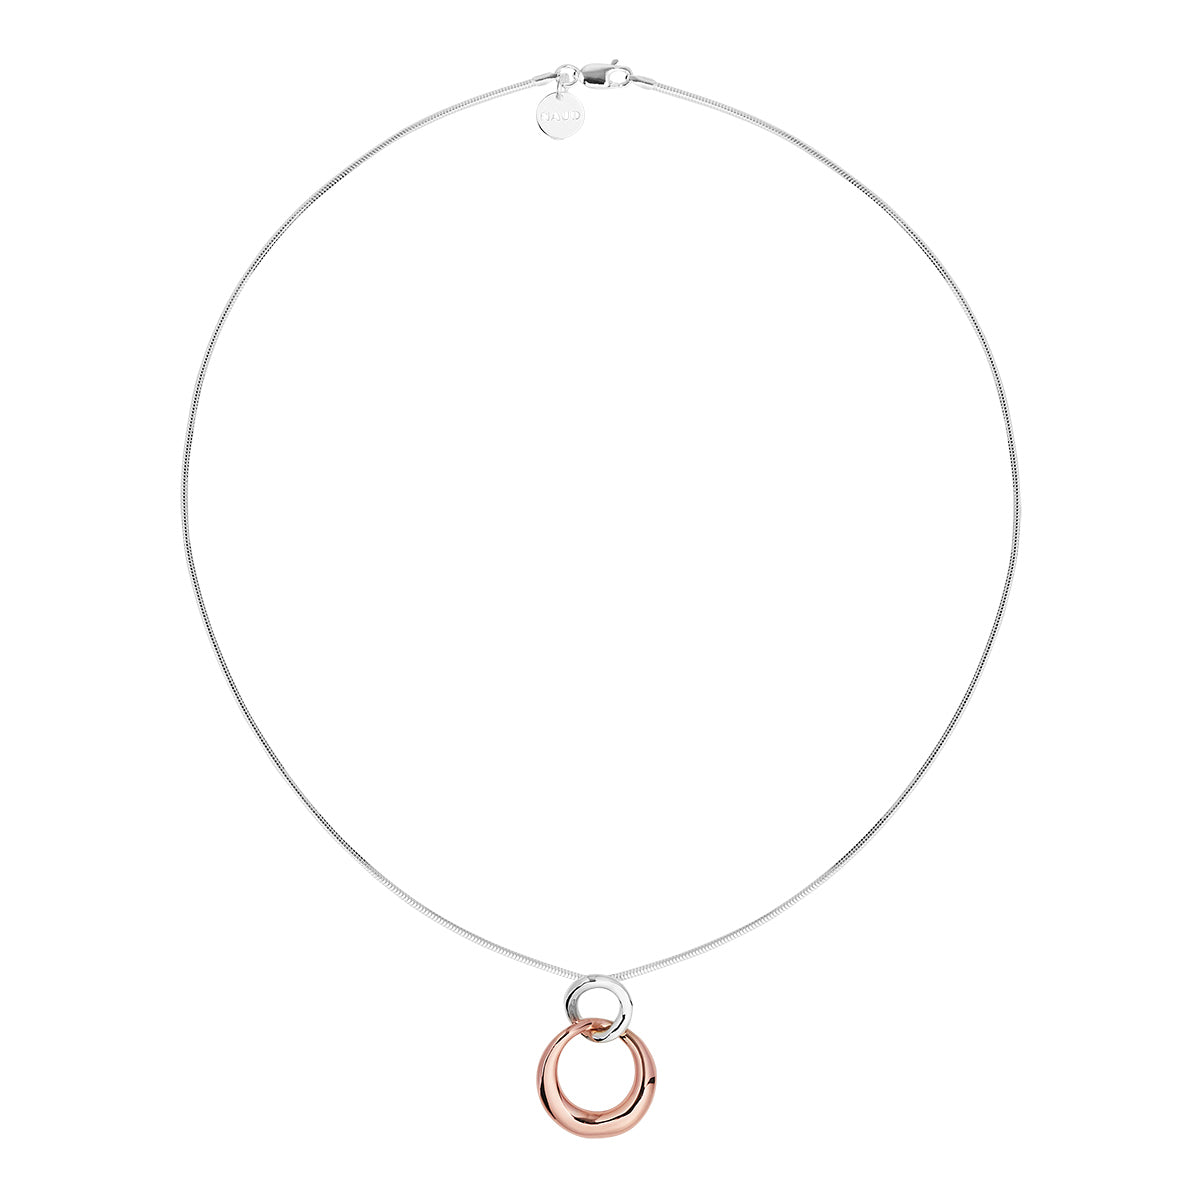 Silver, double circle tapered hollow pendant (20x28mm), one circle rose gold plated, and chain.